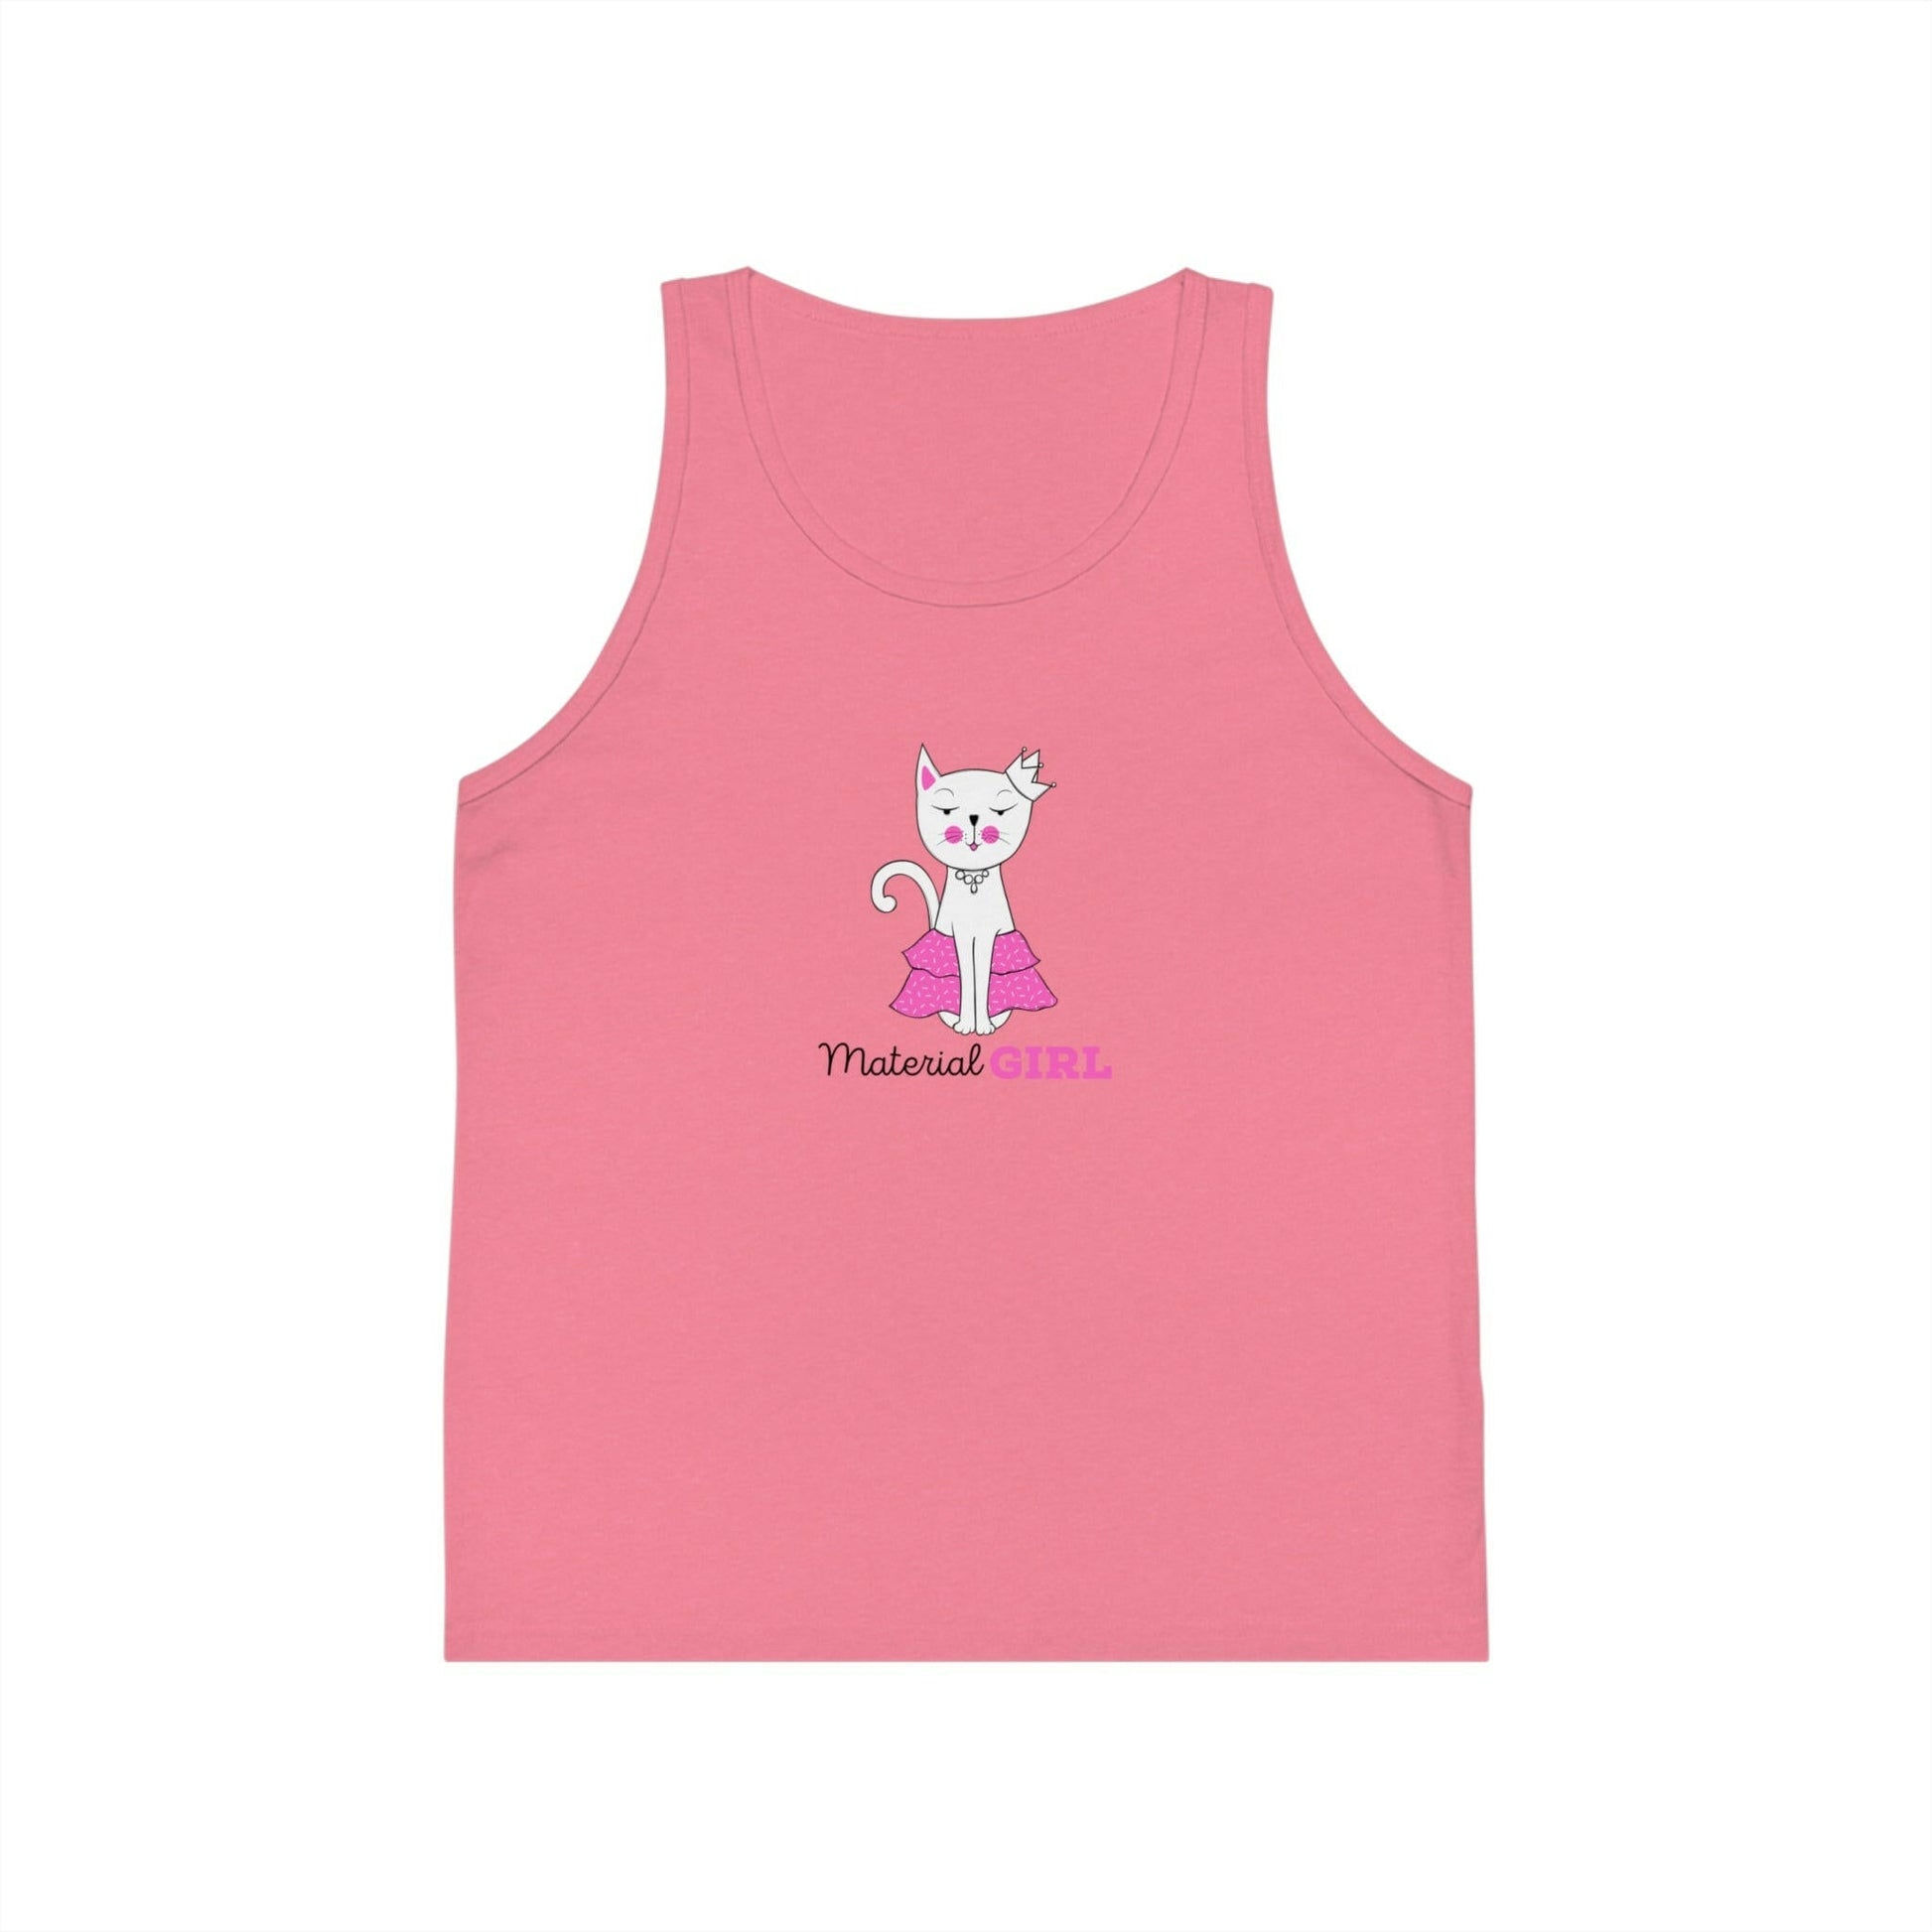 Material Girl Kid's Jersey Tank Top - Kids clothes - Epileptic Al’s Shop